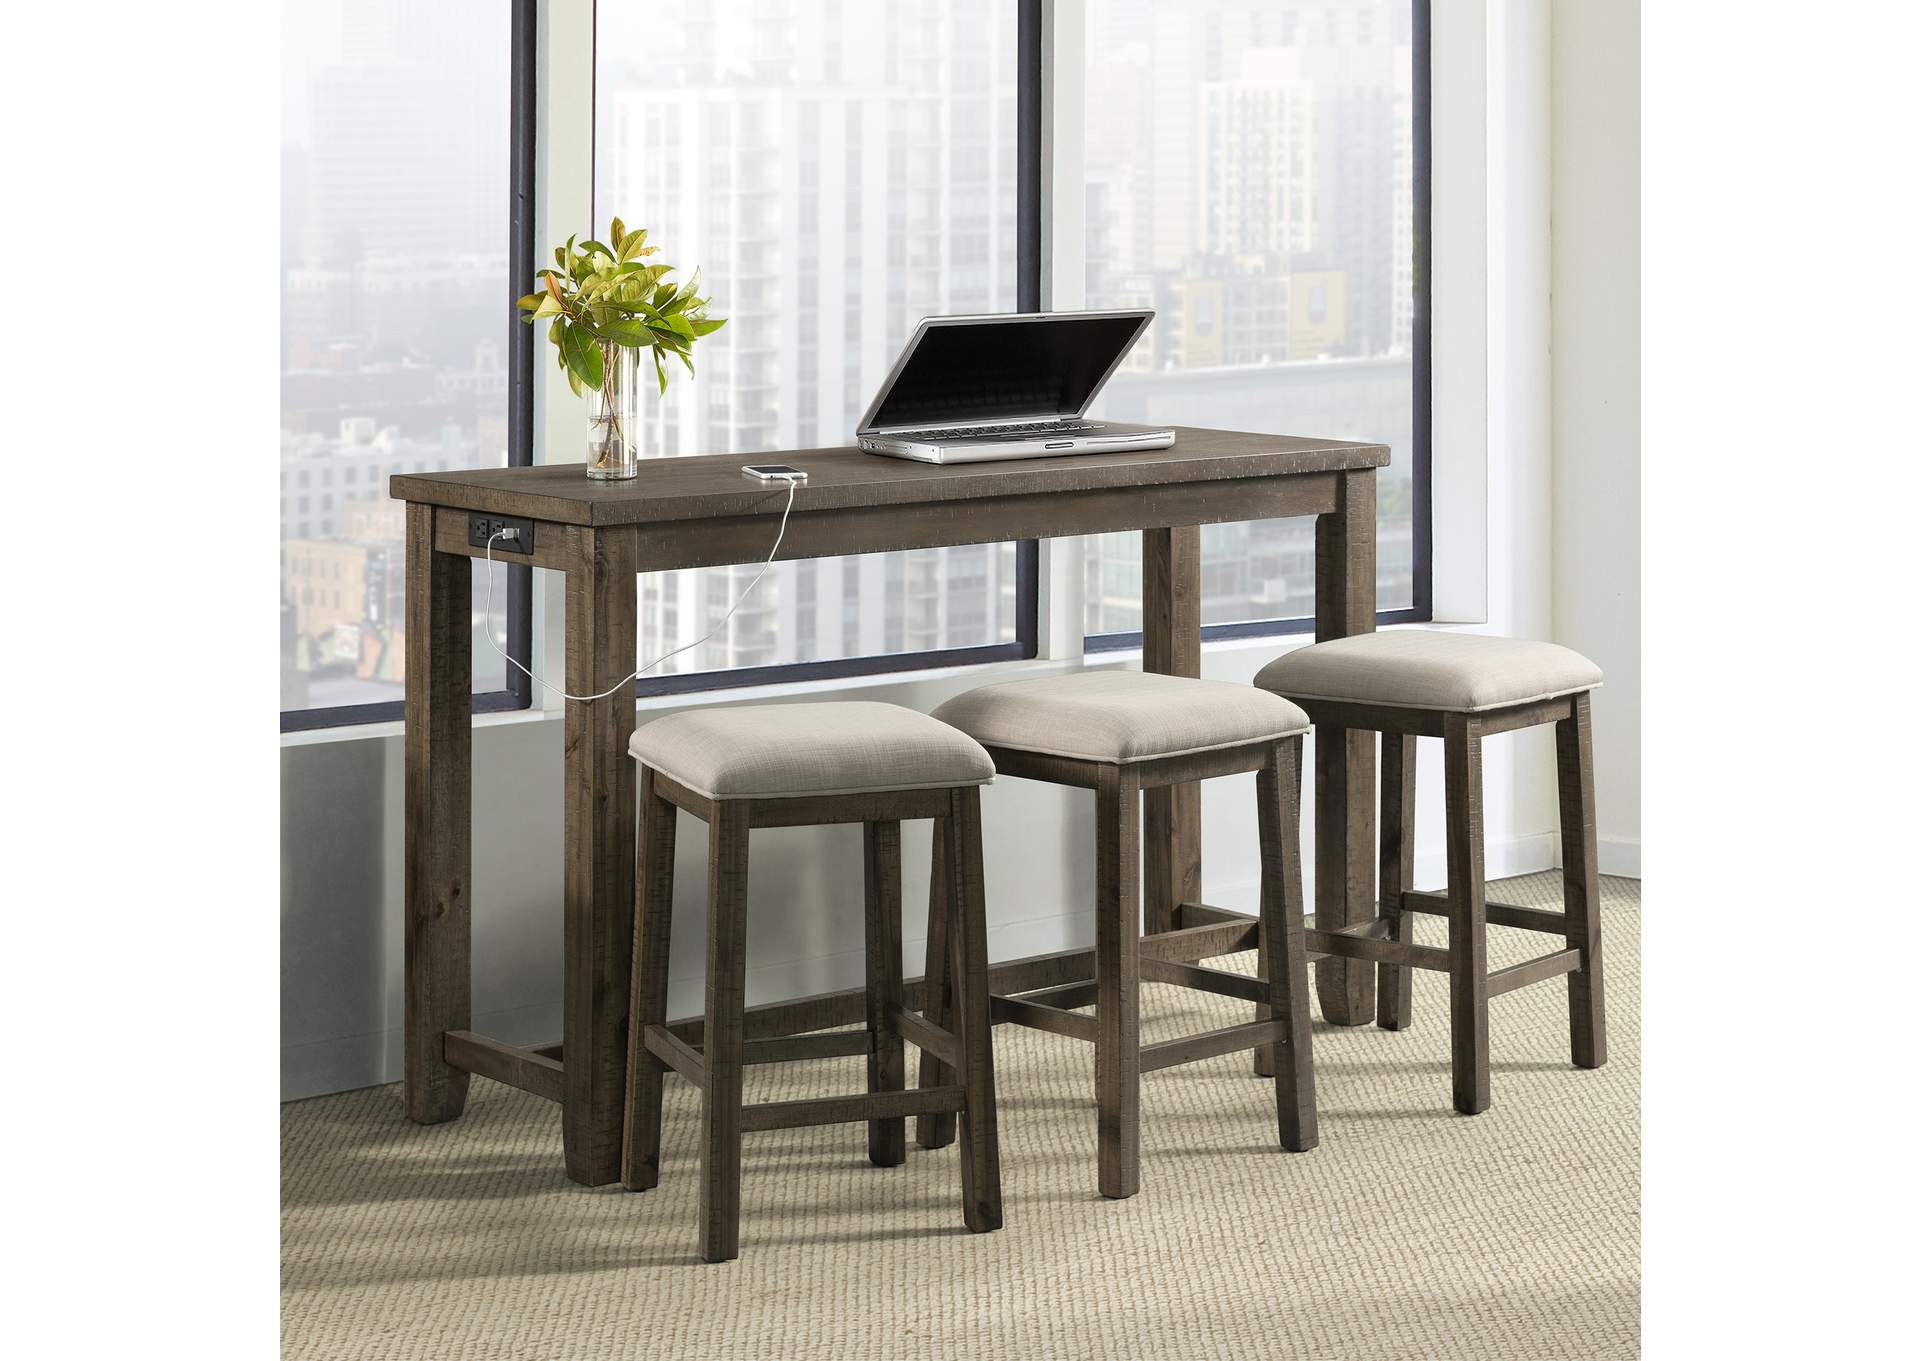 Stone Occasional Bar Table Single Pack Gray Finish Table Three Stools,Elements